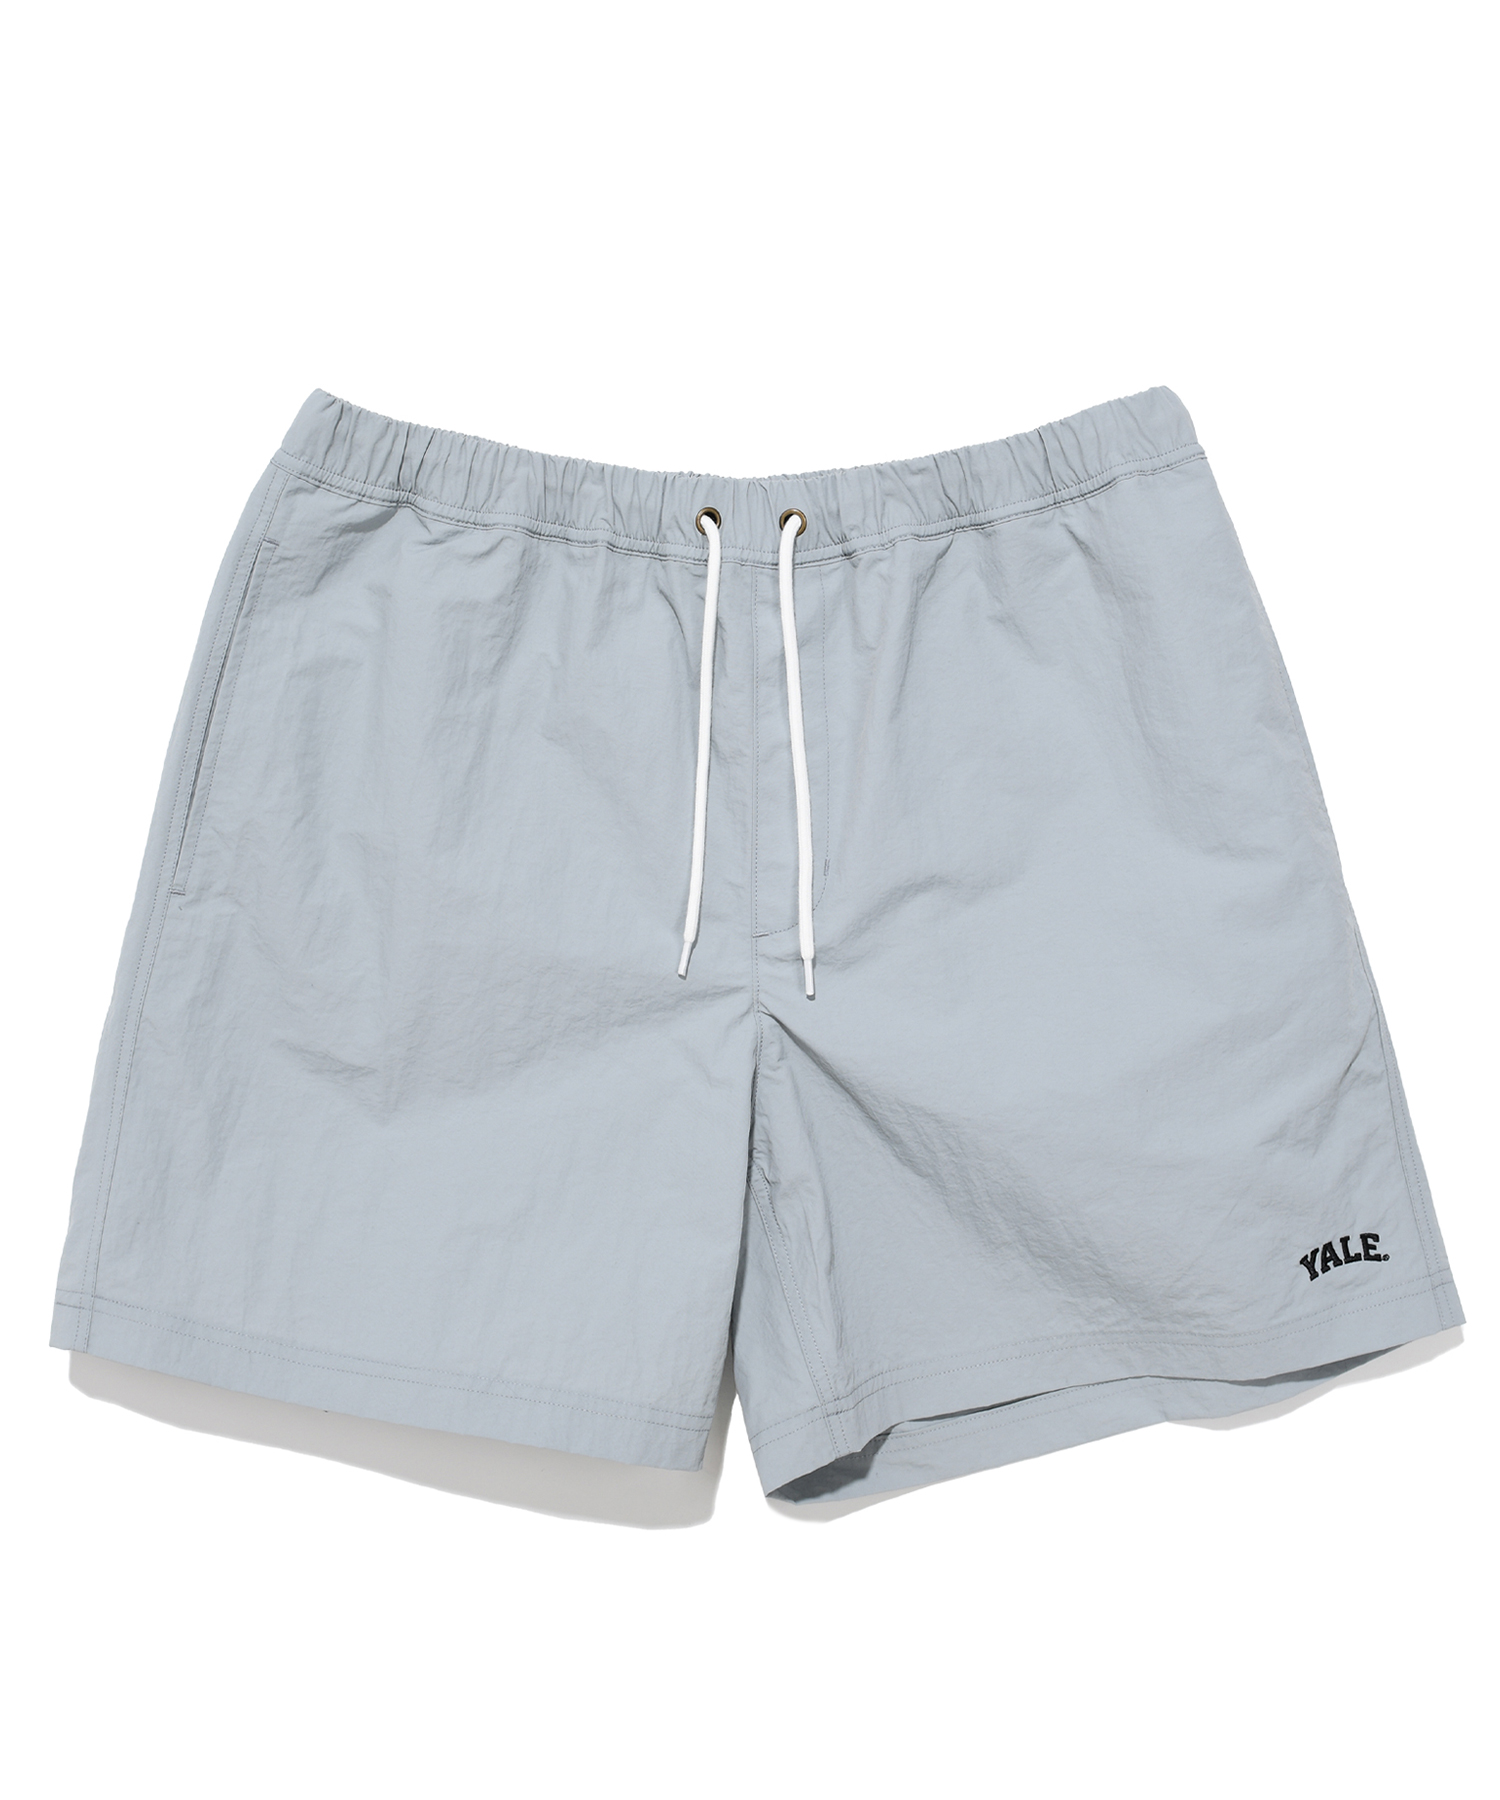 [ONEMILE WEAR] SMALL ARCH LOGO BEACH SHORTS GRAY